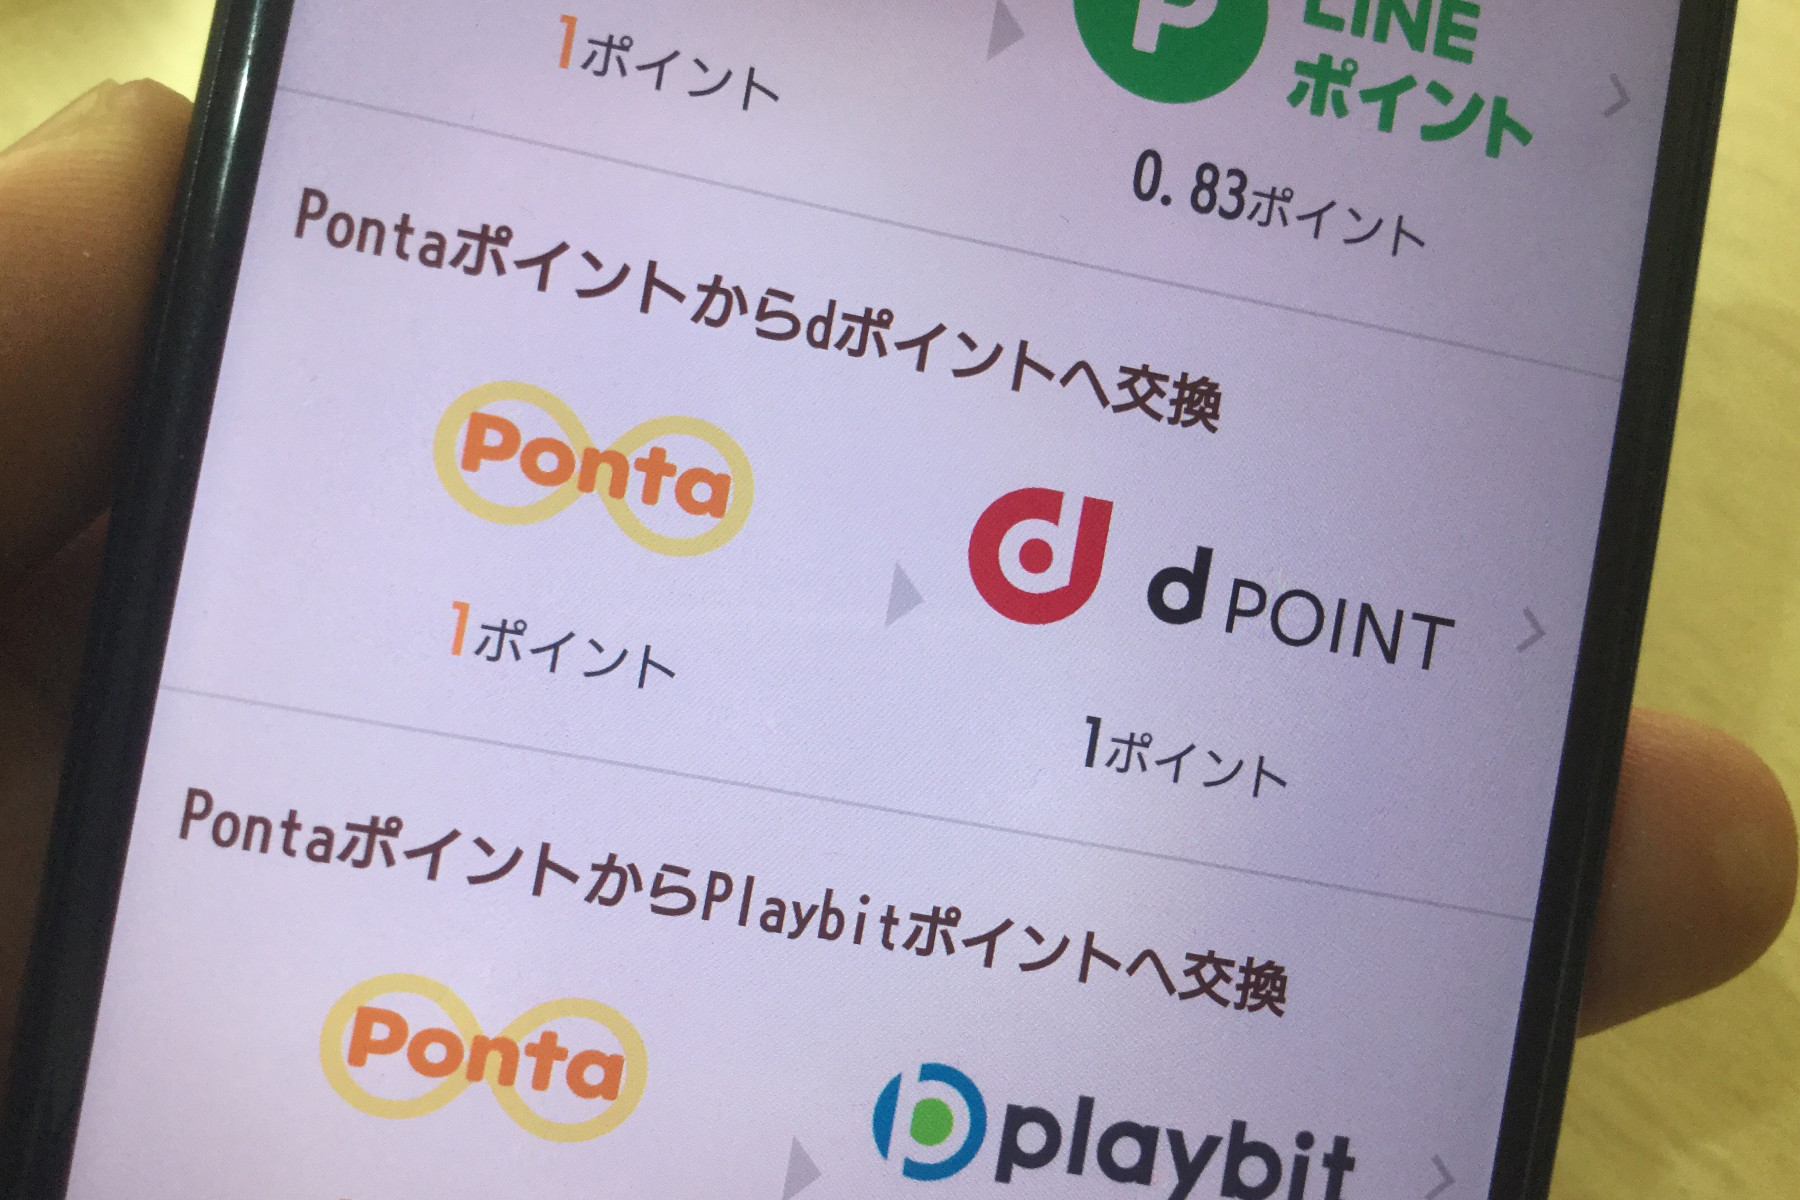 pontapoint